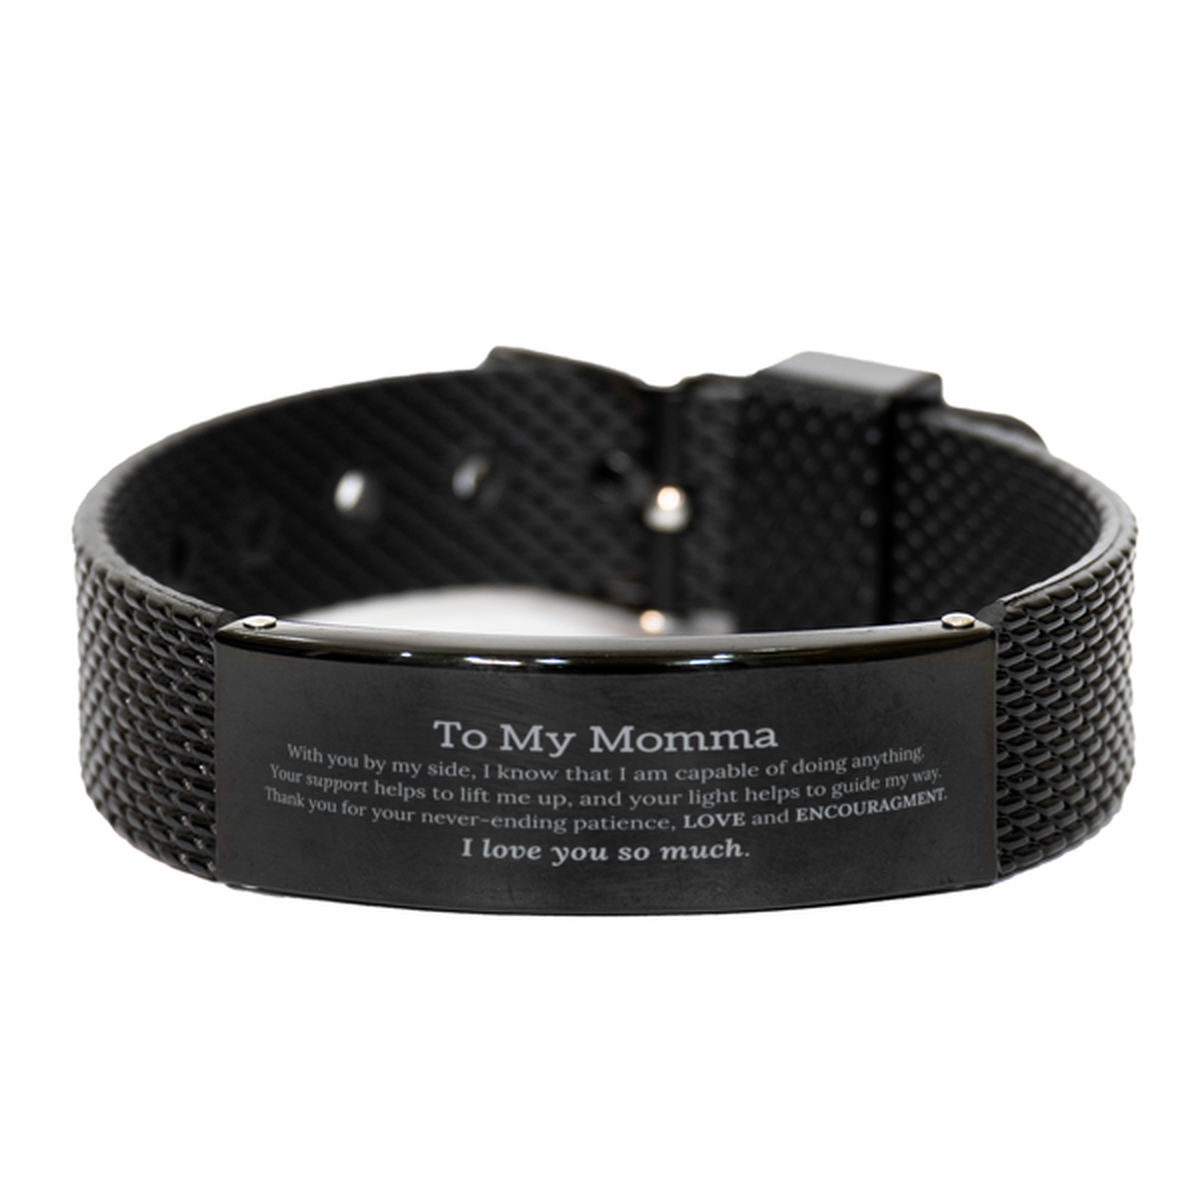 Appreciation Momma Black Shark Mesh Bracelet Gifts, To My Momma Birthday Christmas Wedding Keepsake Gifts for Momma With you by my side, I know that I am capable of doing anything. I love you so much